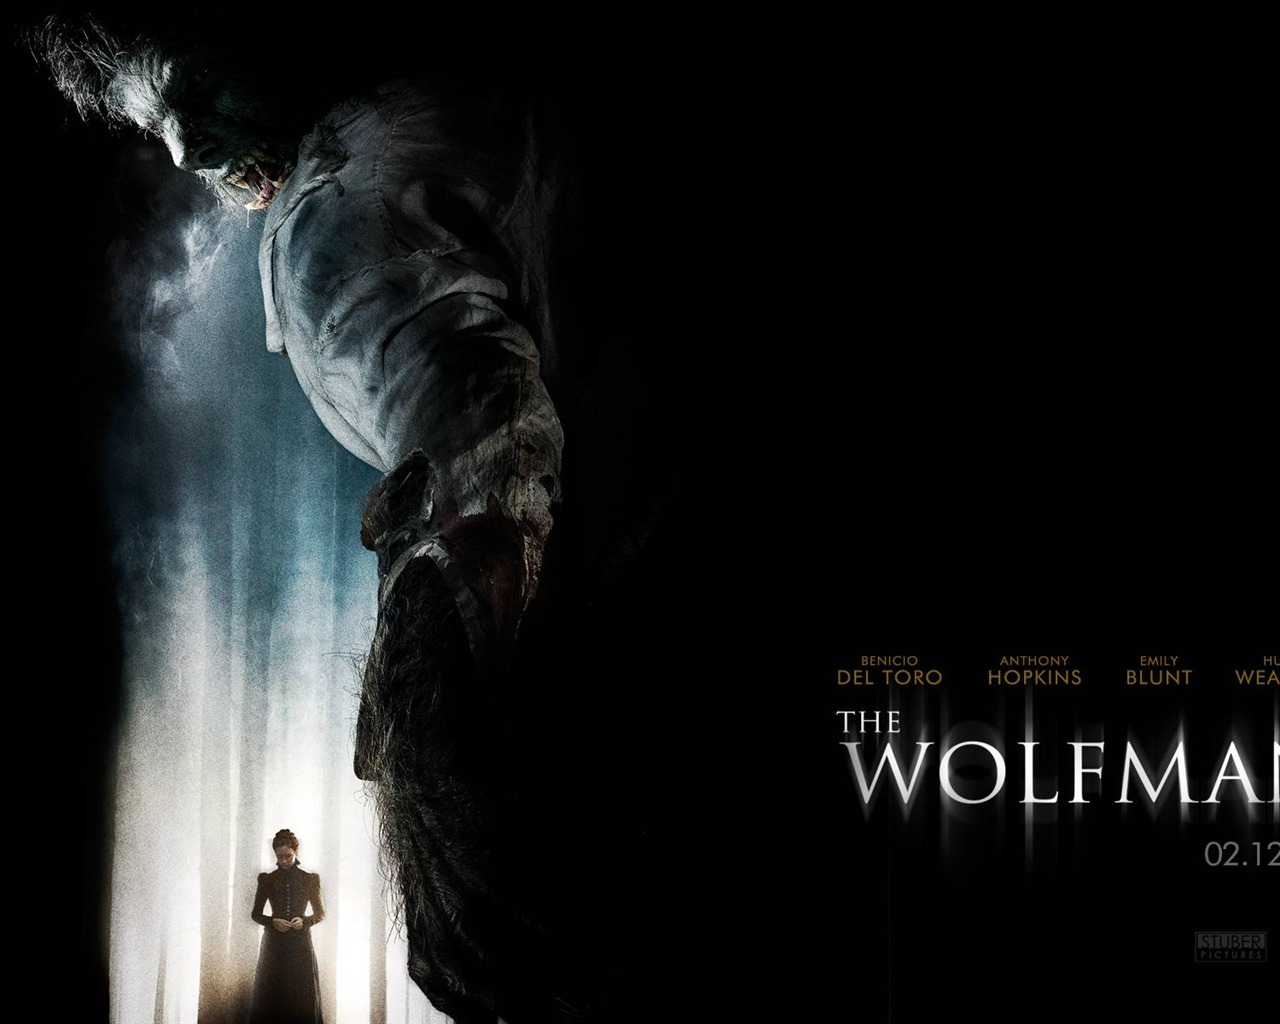 The Wolfman Movie Wallpapers #6 - 1280x1024